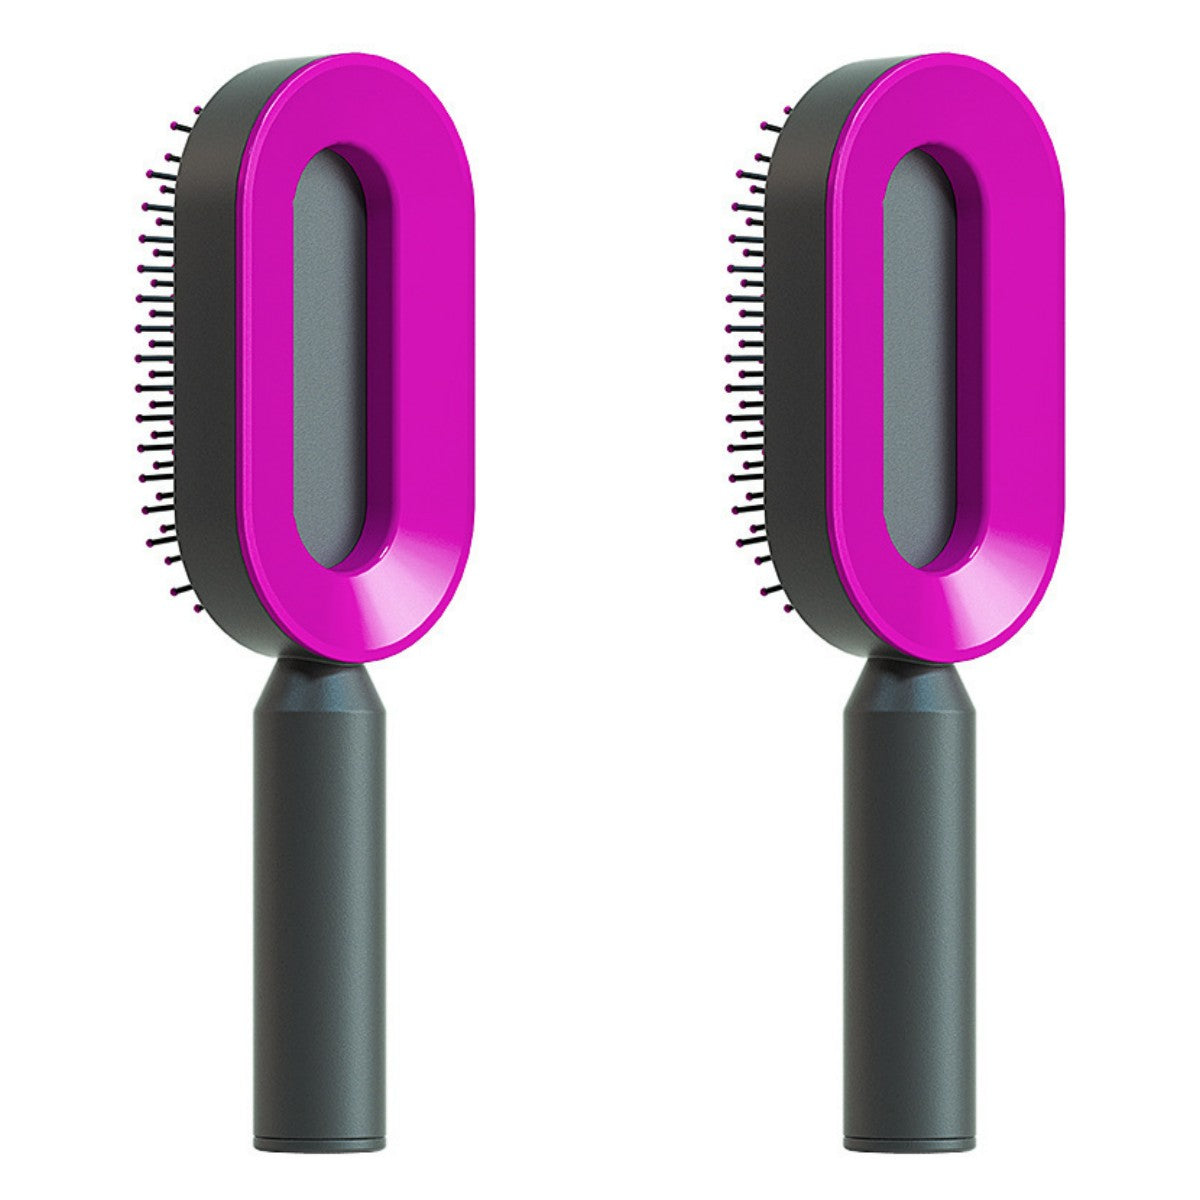 Self Cleaning Hair Brush For Women One-key Cleaning Hair Loss Airbag Massage Scalp Comb Anti-Static Hairbrush Set M